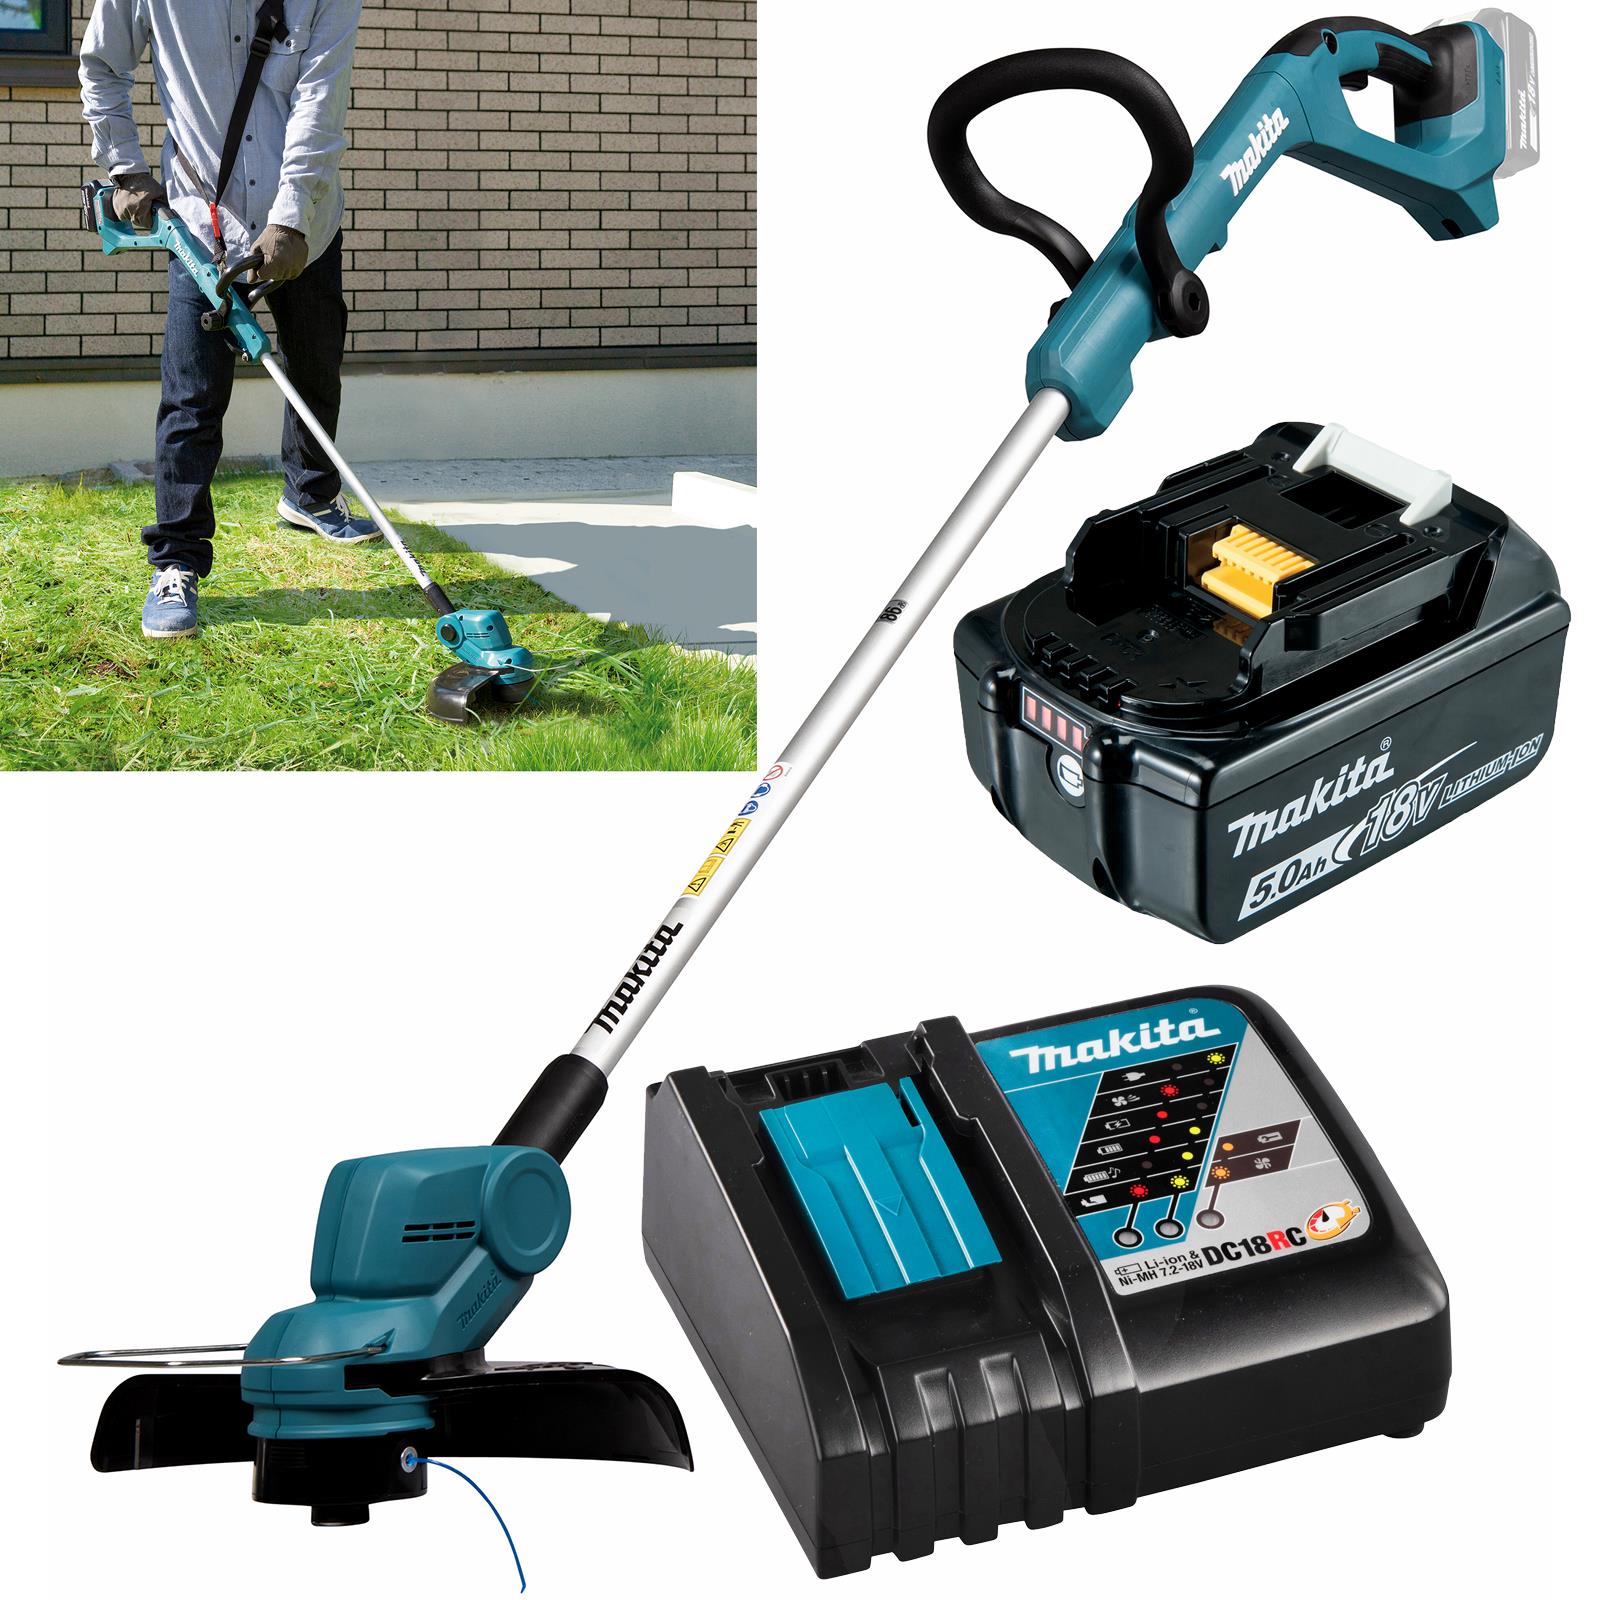 Makita Line Trimmer Strimmer Kit 18V LXT Telescopic Shaft Cordless Garden Lawn Strimming 5Ah Battery and Charger DUR193RT